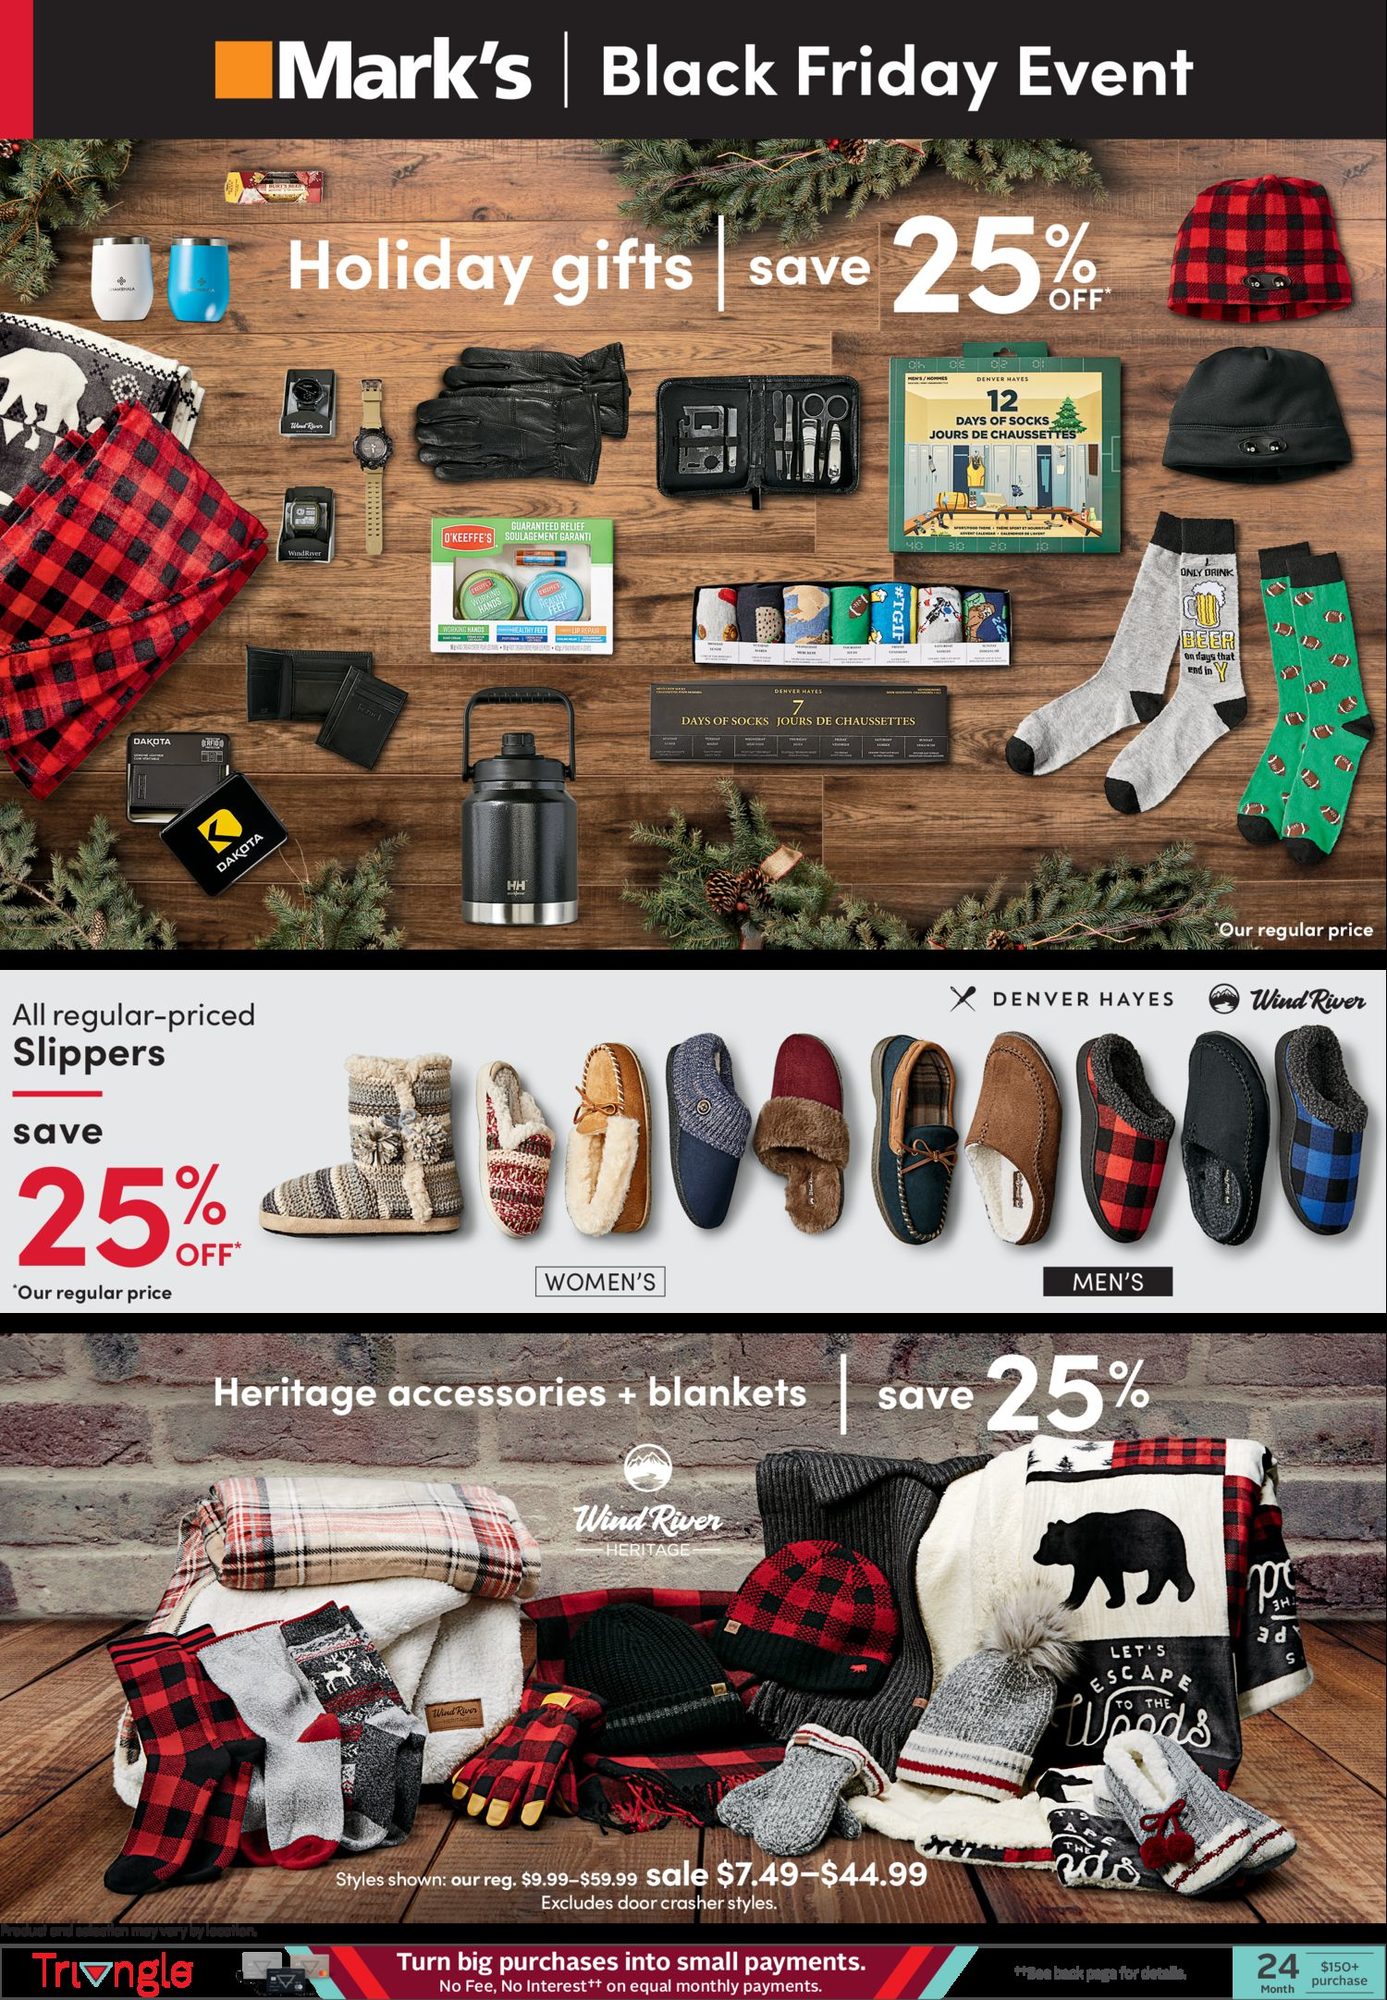 Mark’s Black Friday 2021 Sale Flyer - 70% OFF - What Stores Can You Black Friday Shop Online